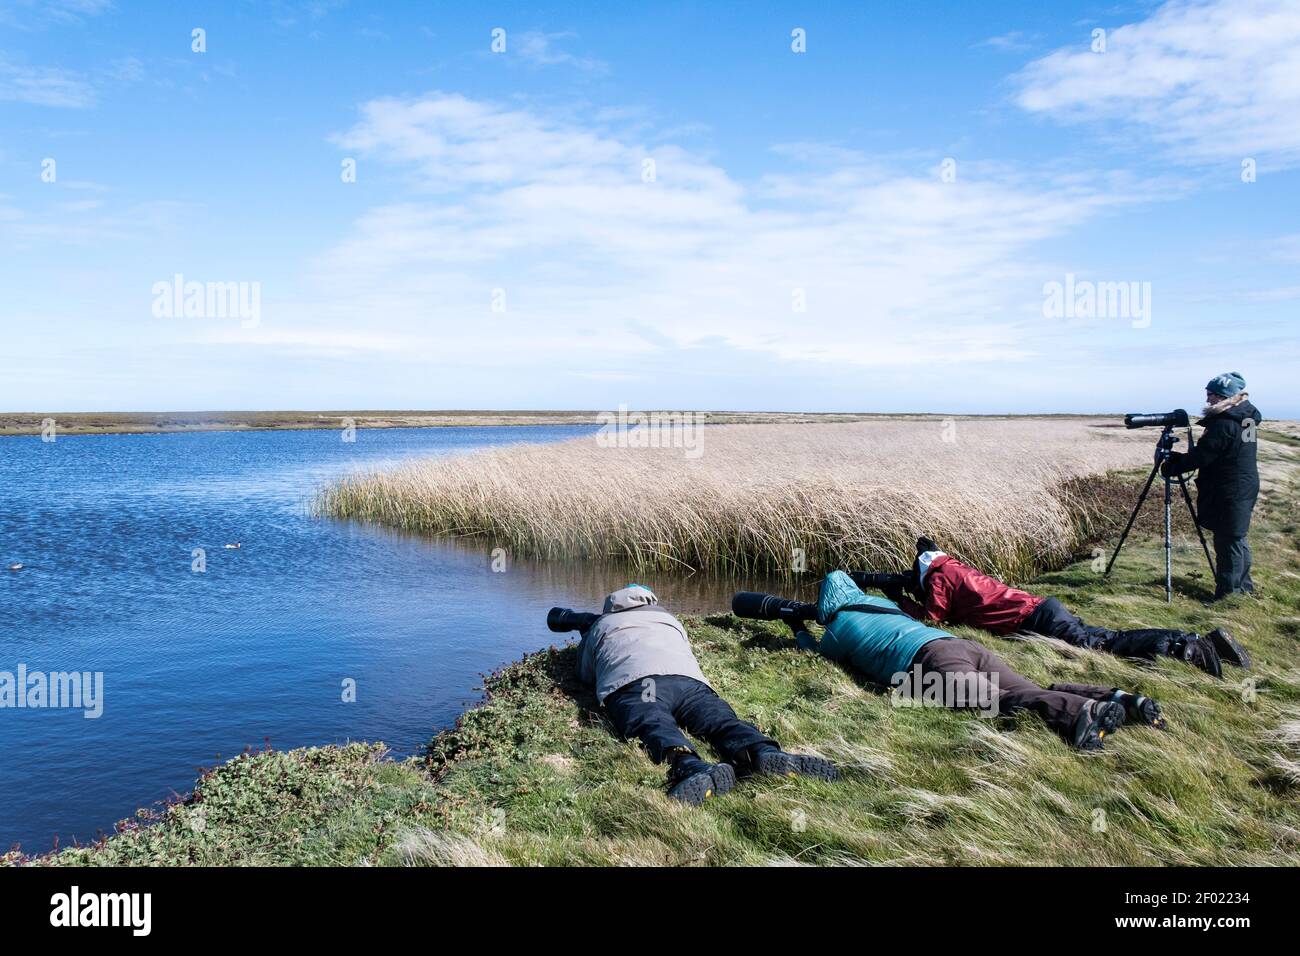 Tourists photographing the waterbirds on Long Pond, Sea Lion Island, Falkland Islands, British Overseas Territory Stock Photo